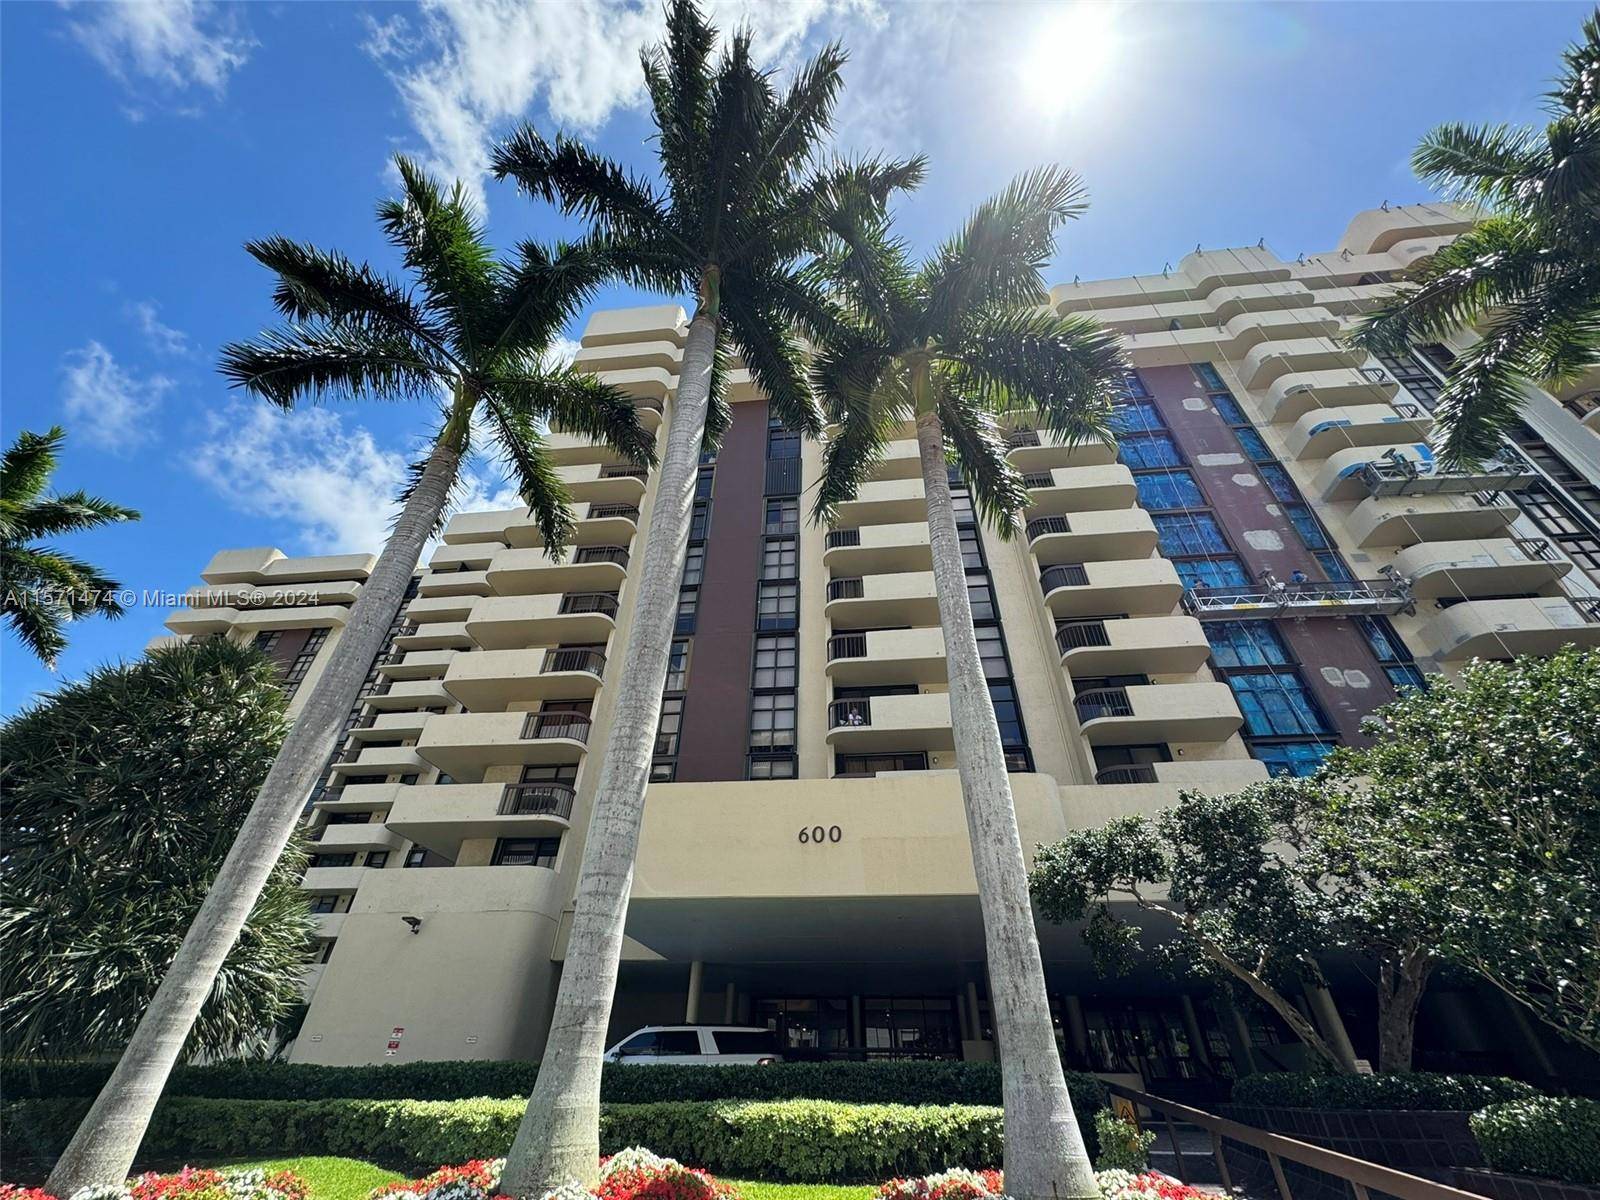 Discover the epitome of Coral Gables living in this 2 bedroom, 2 bathroom condo.